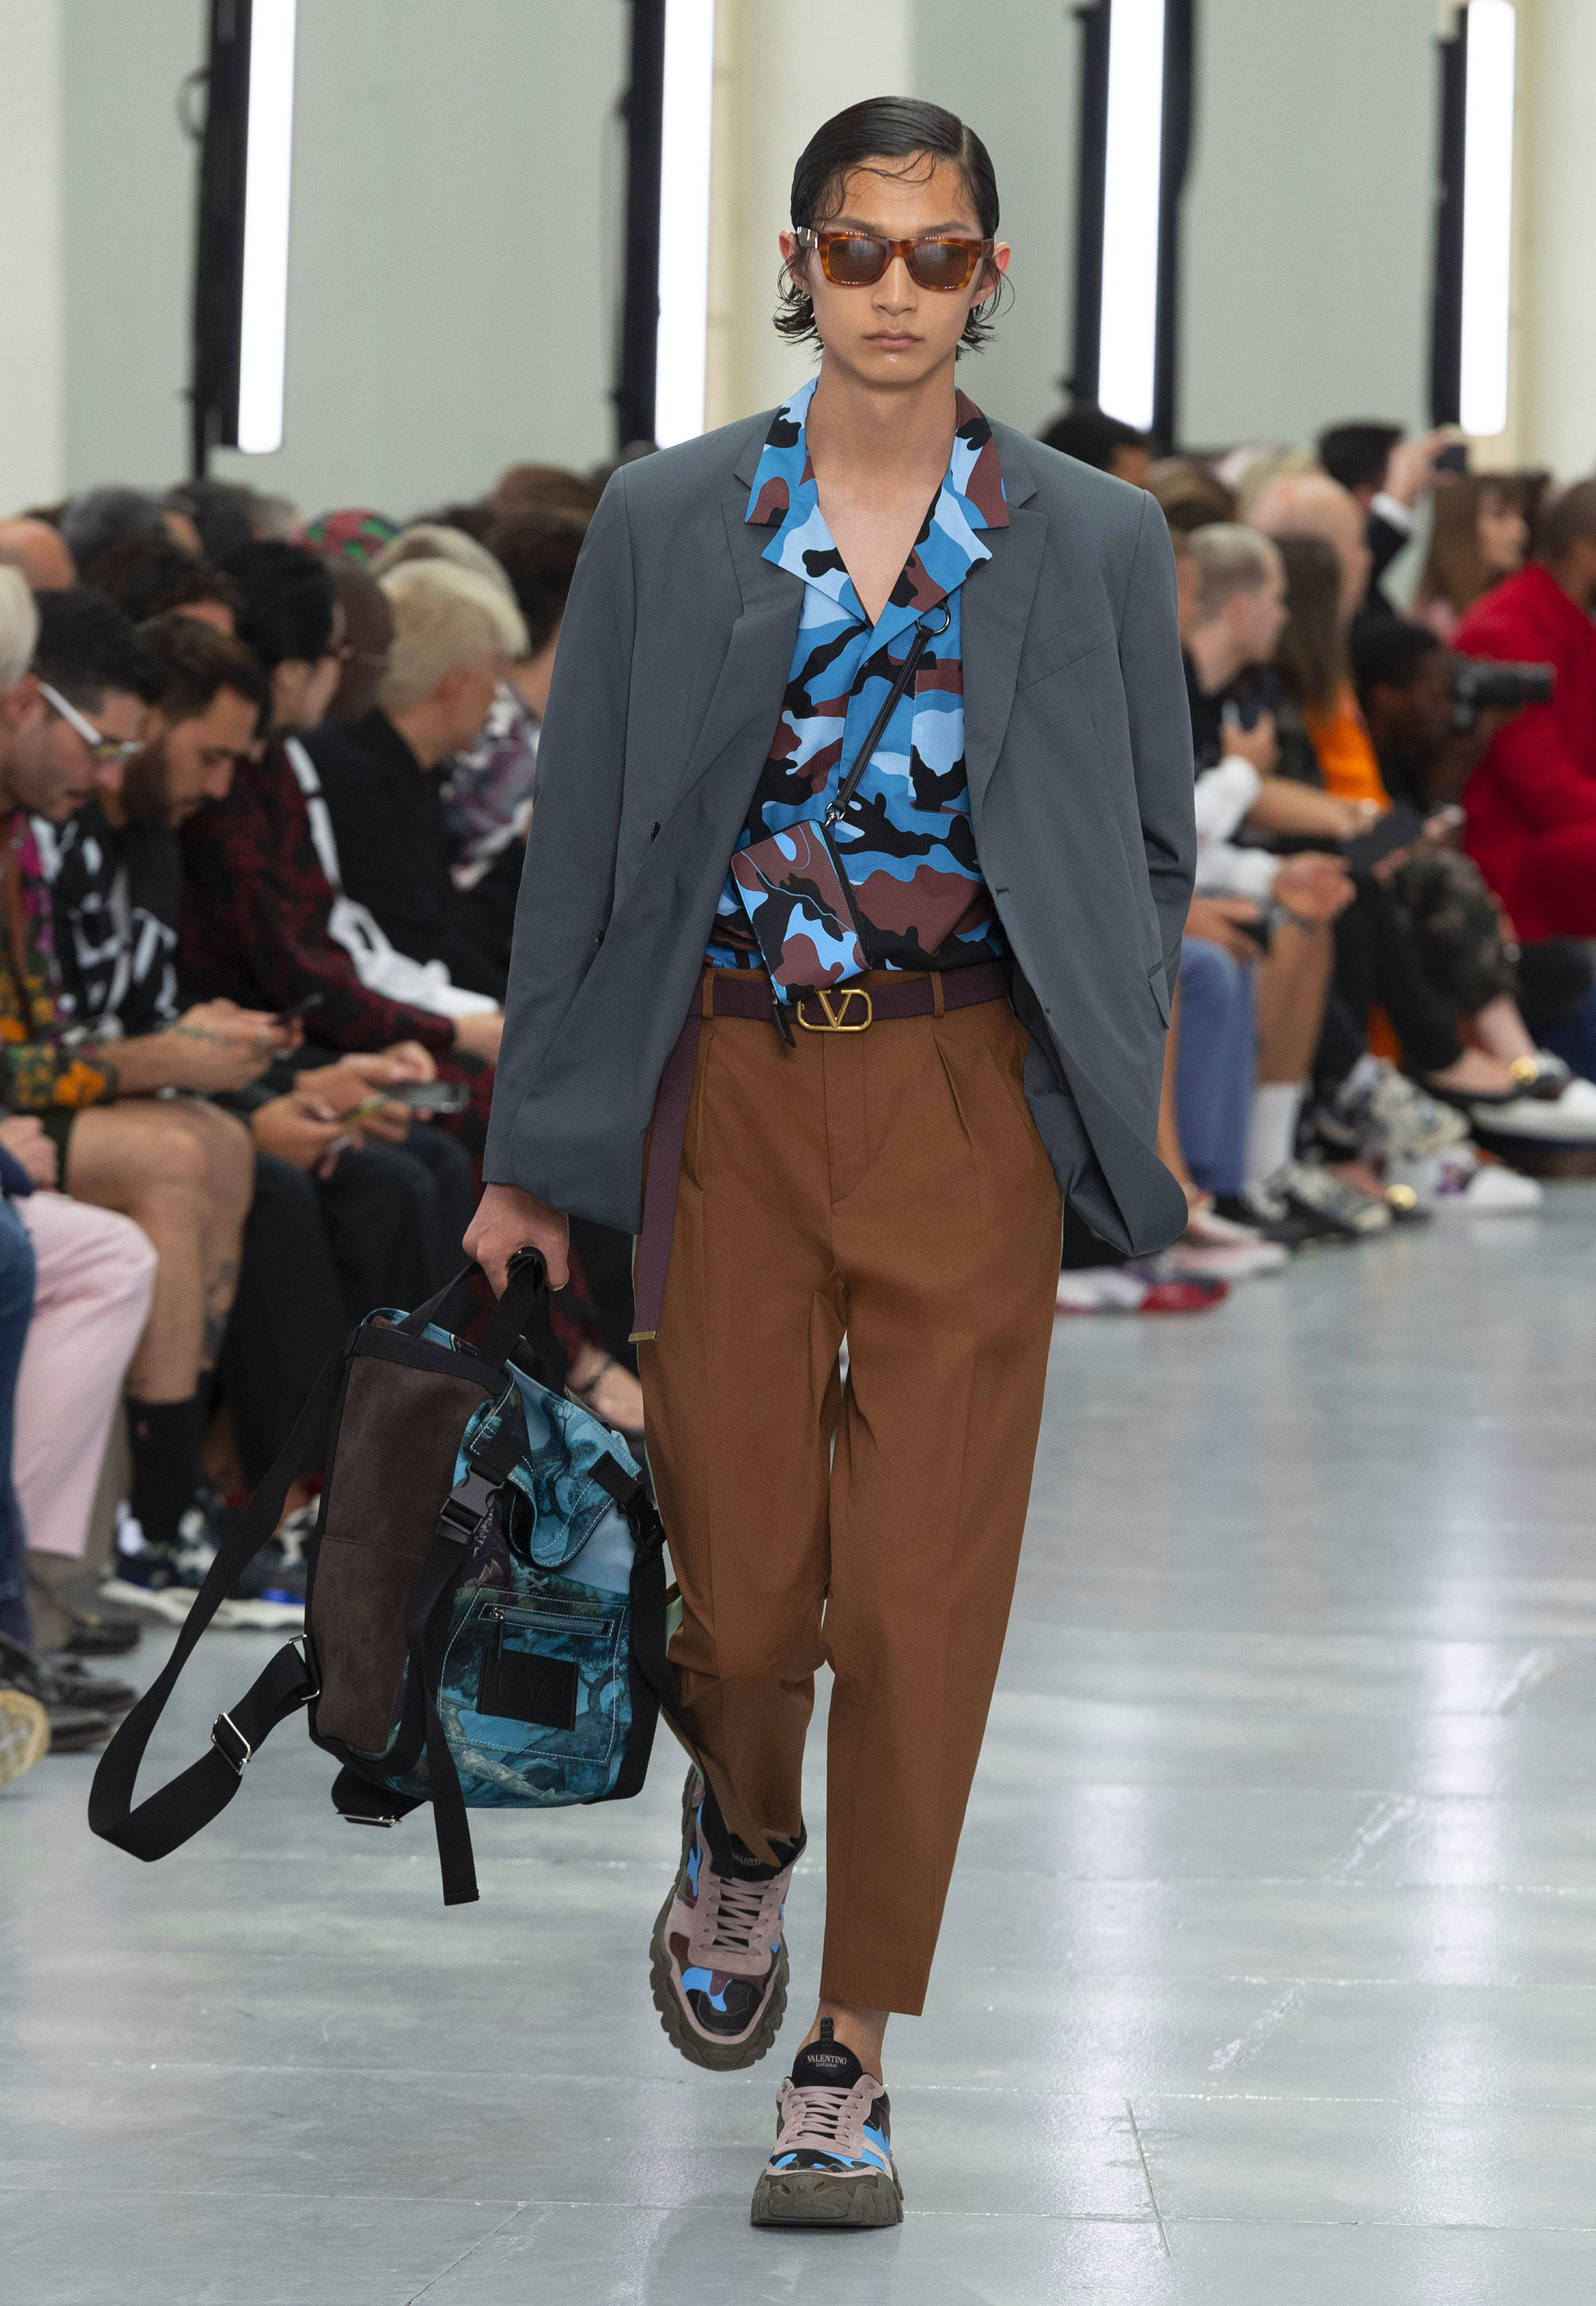 SPRING SUMMER 2020 MENSWEAR COLLECTIONS